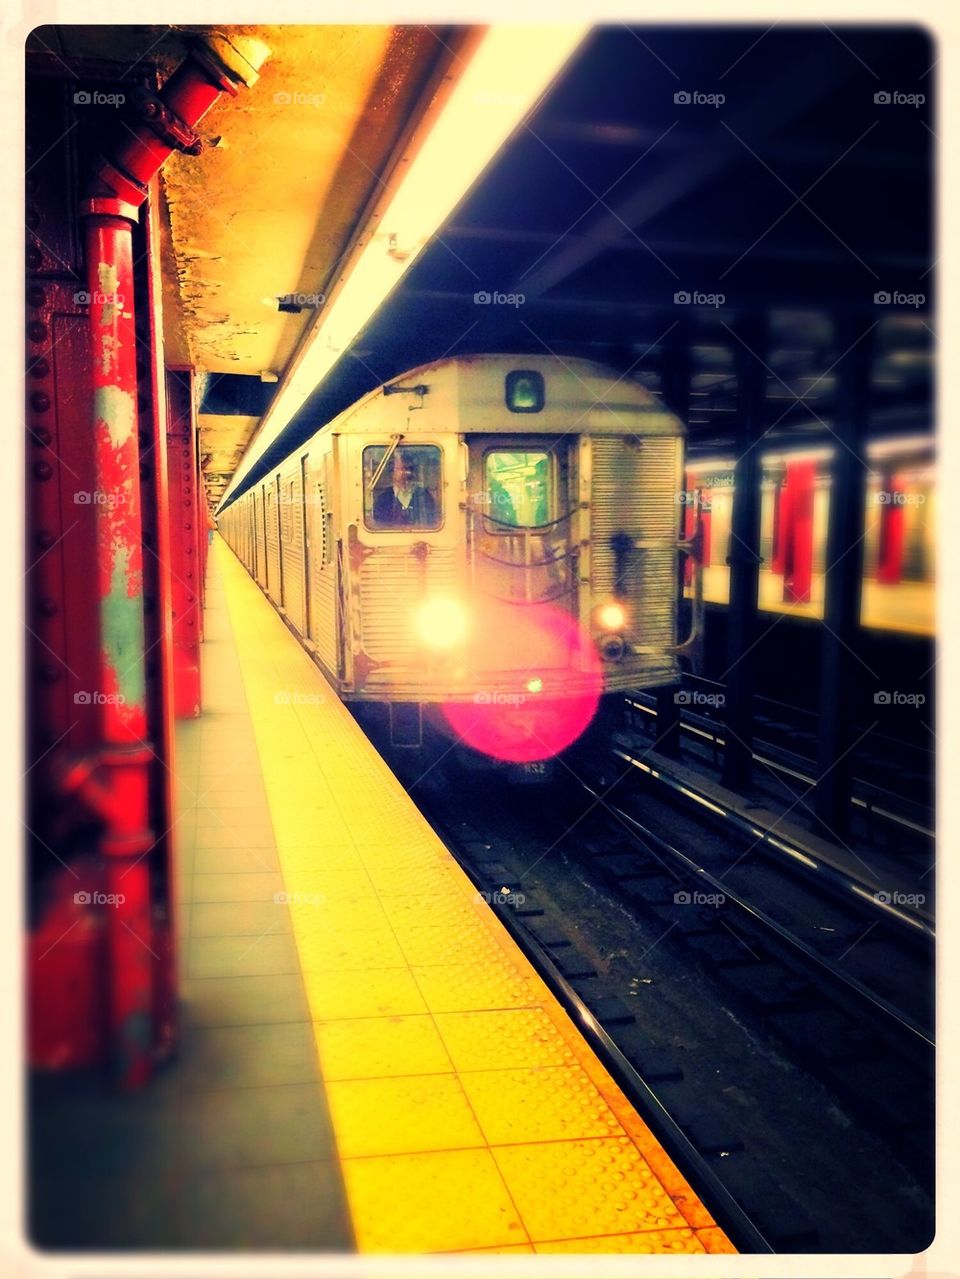 C train pulling into 34th street station